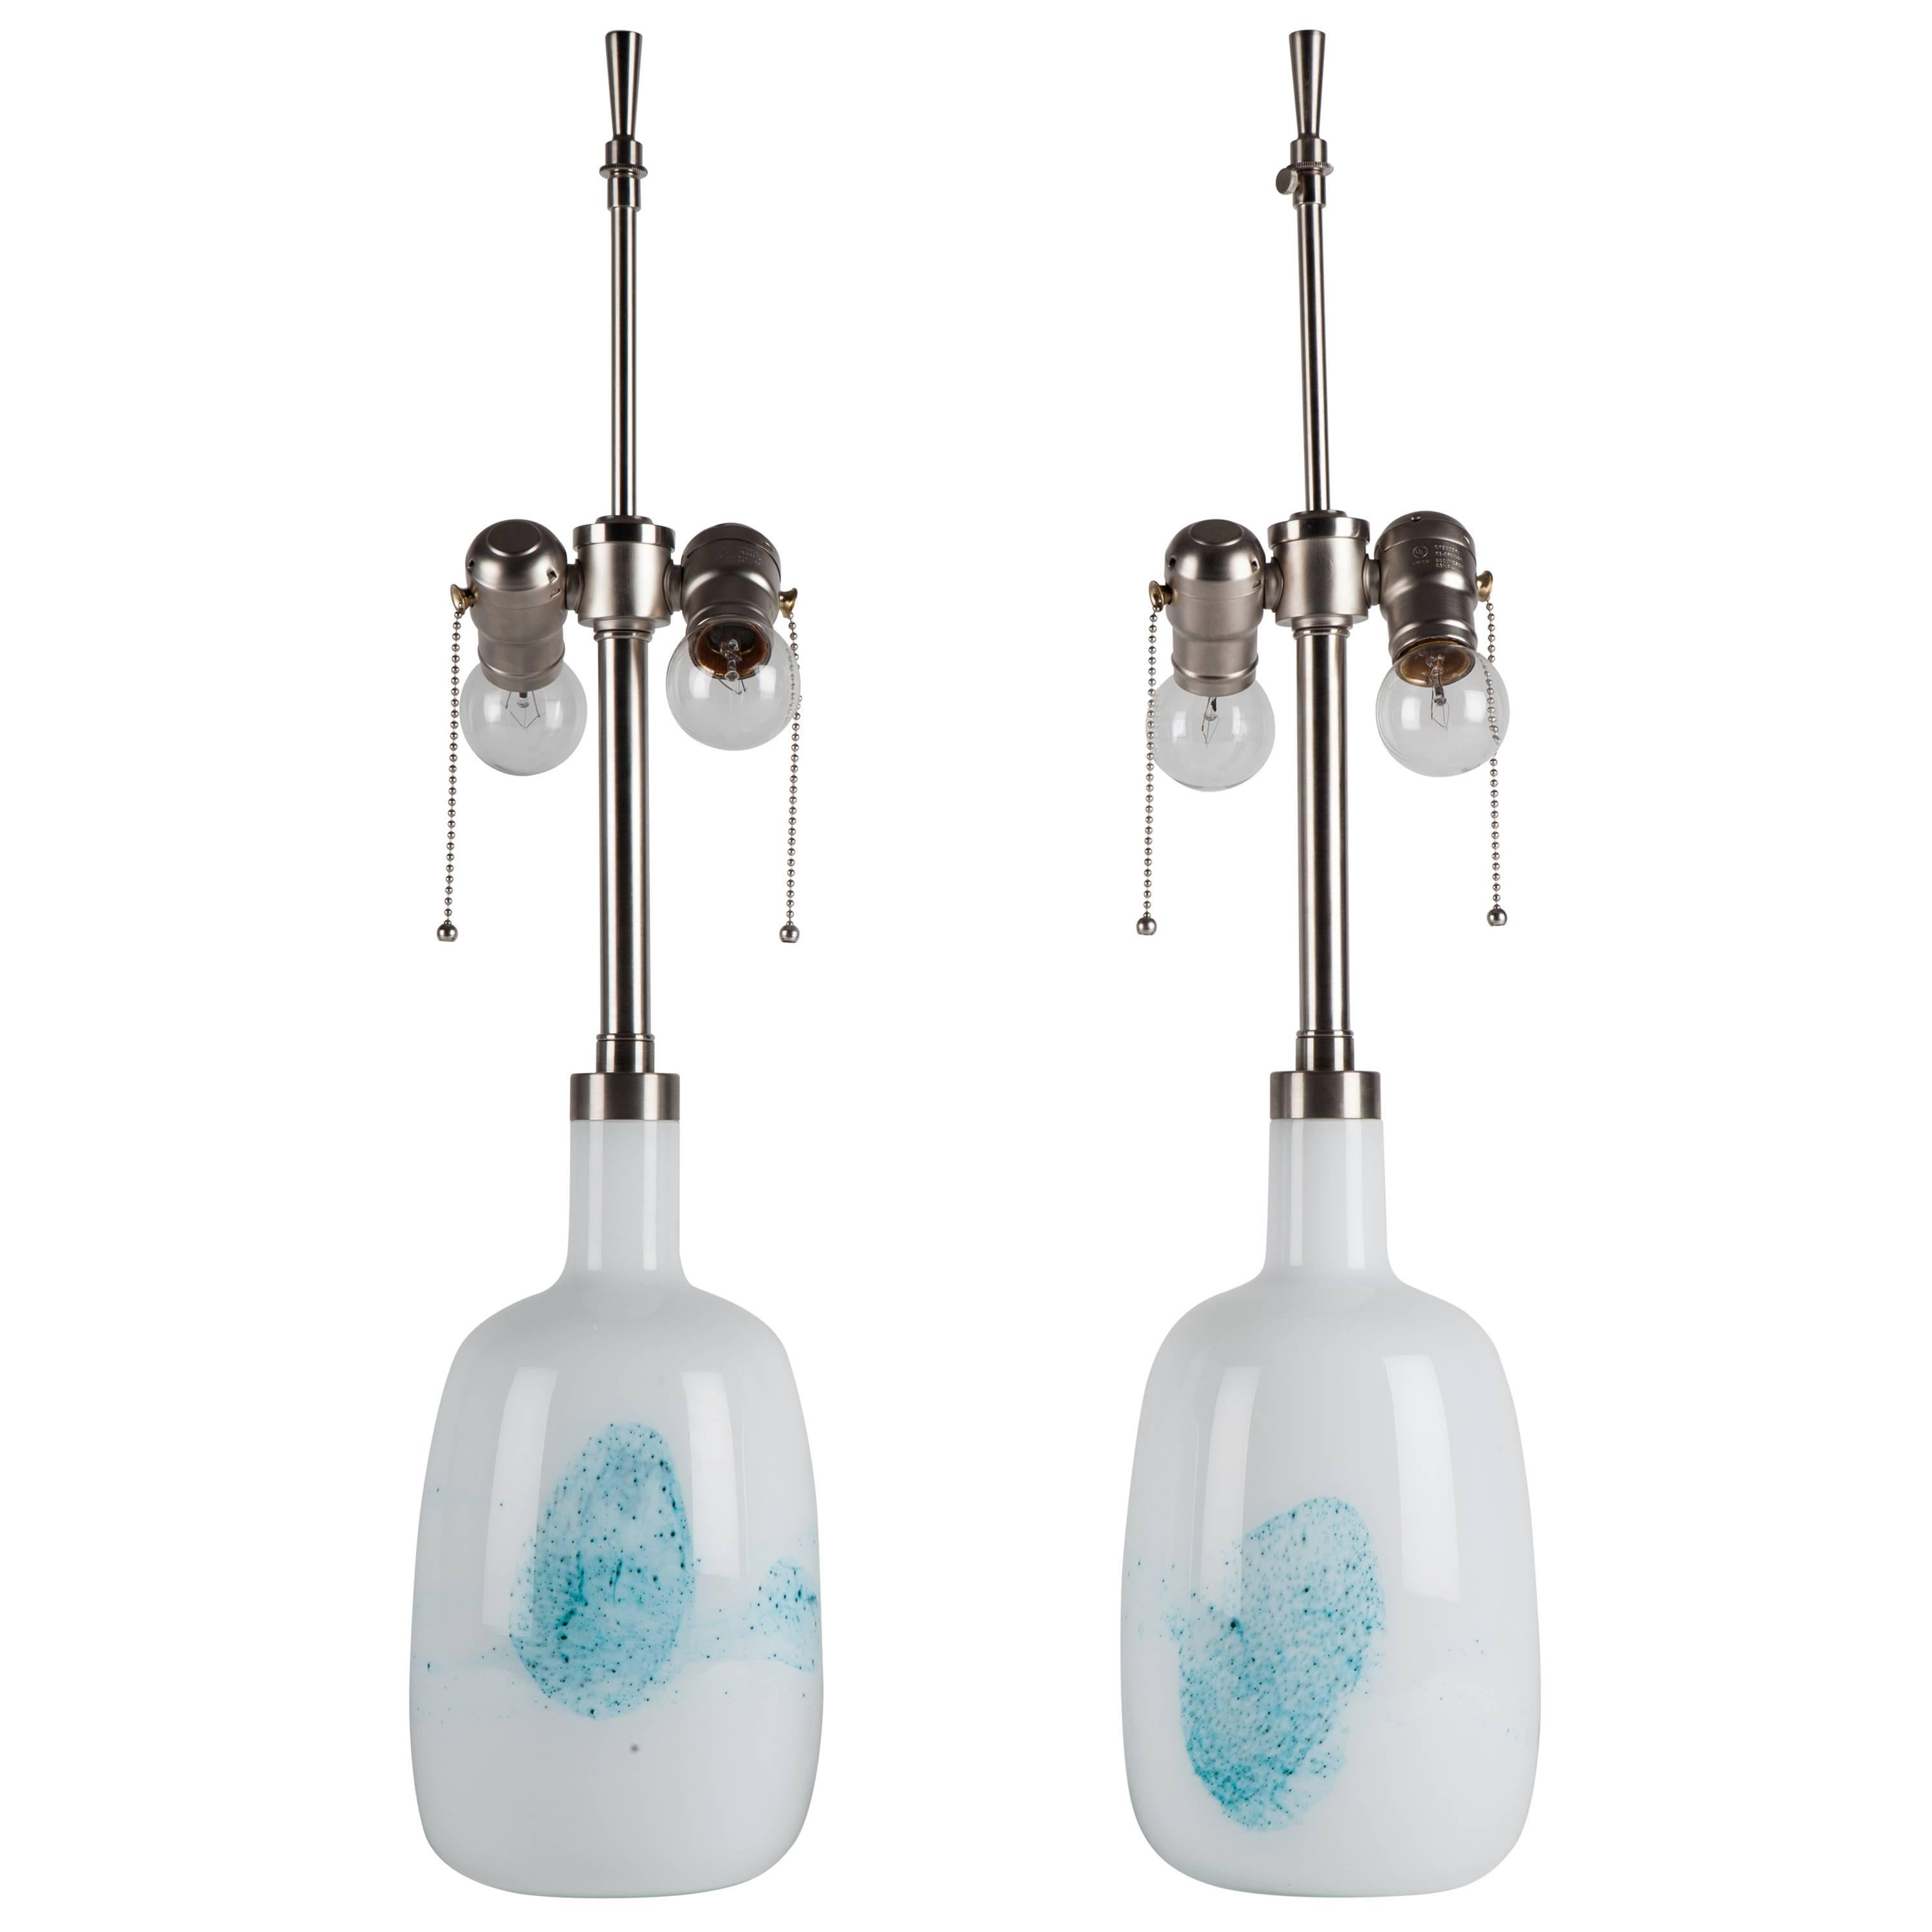 Blue and White Blown Glass Lamps with Nickel Fittings by Danish Maker Le Klint